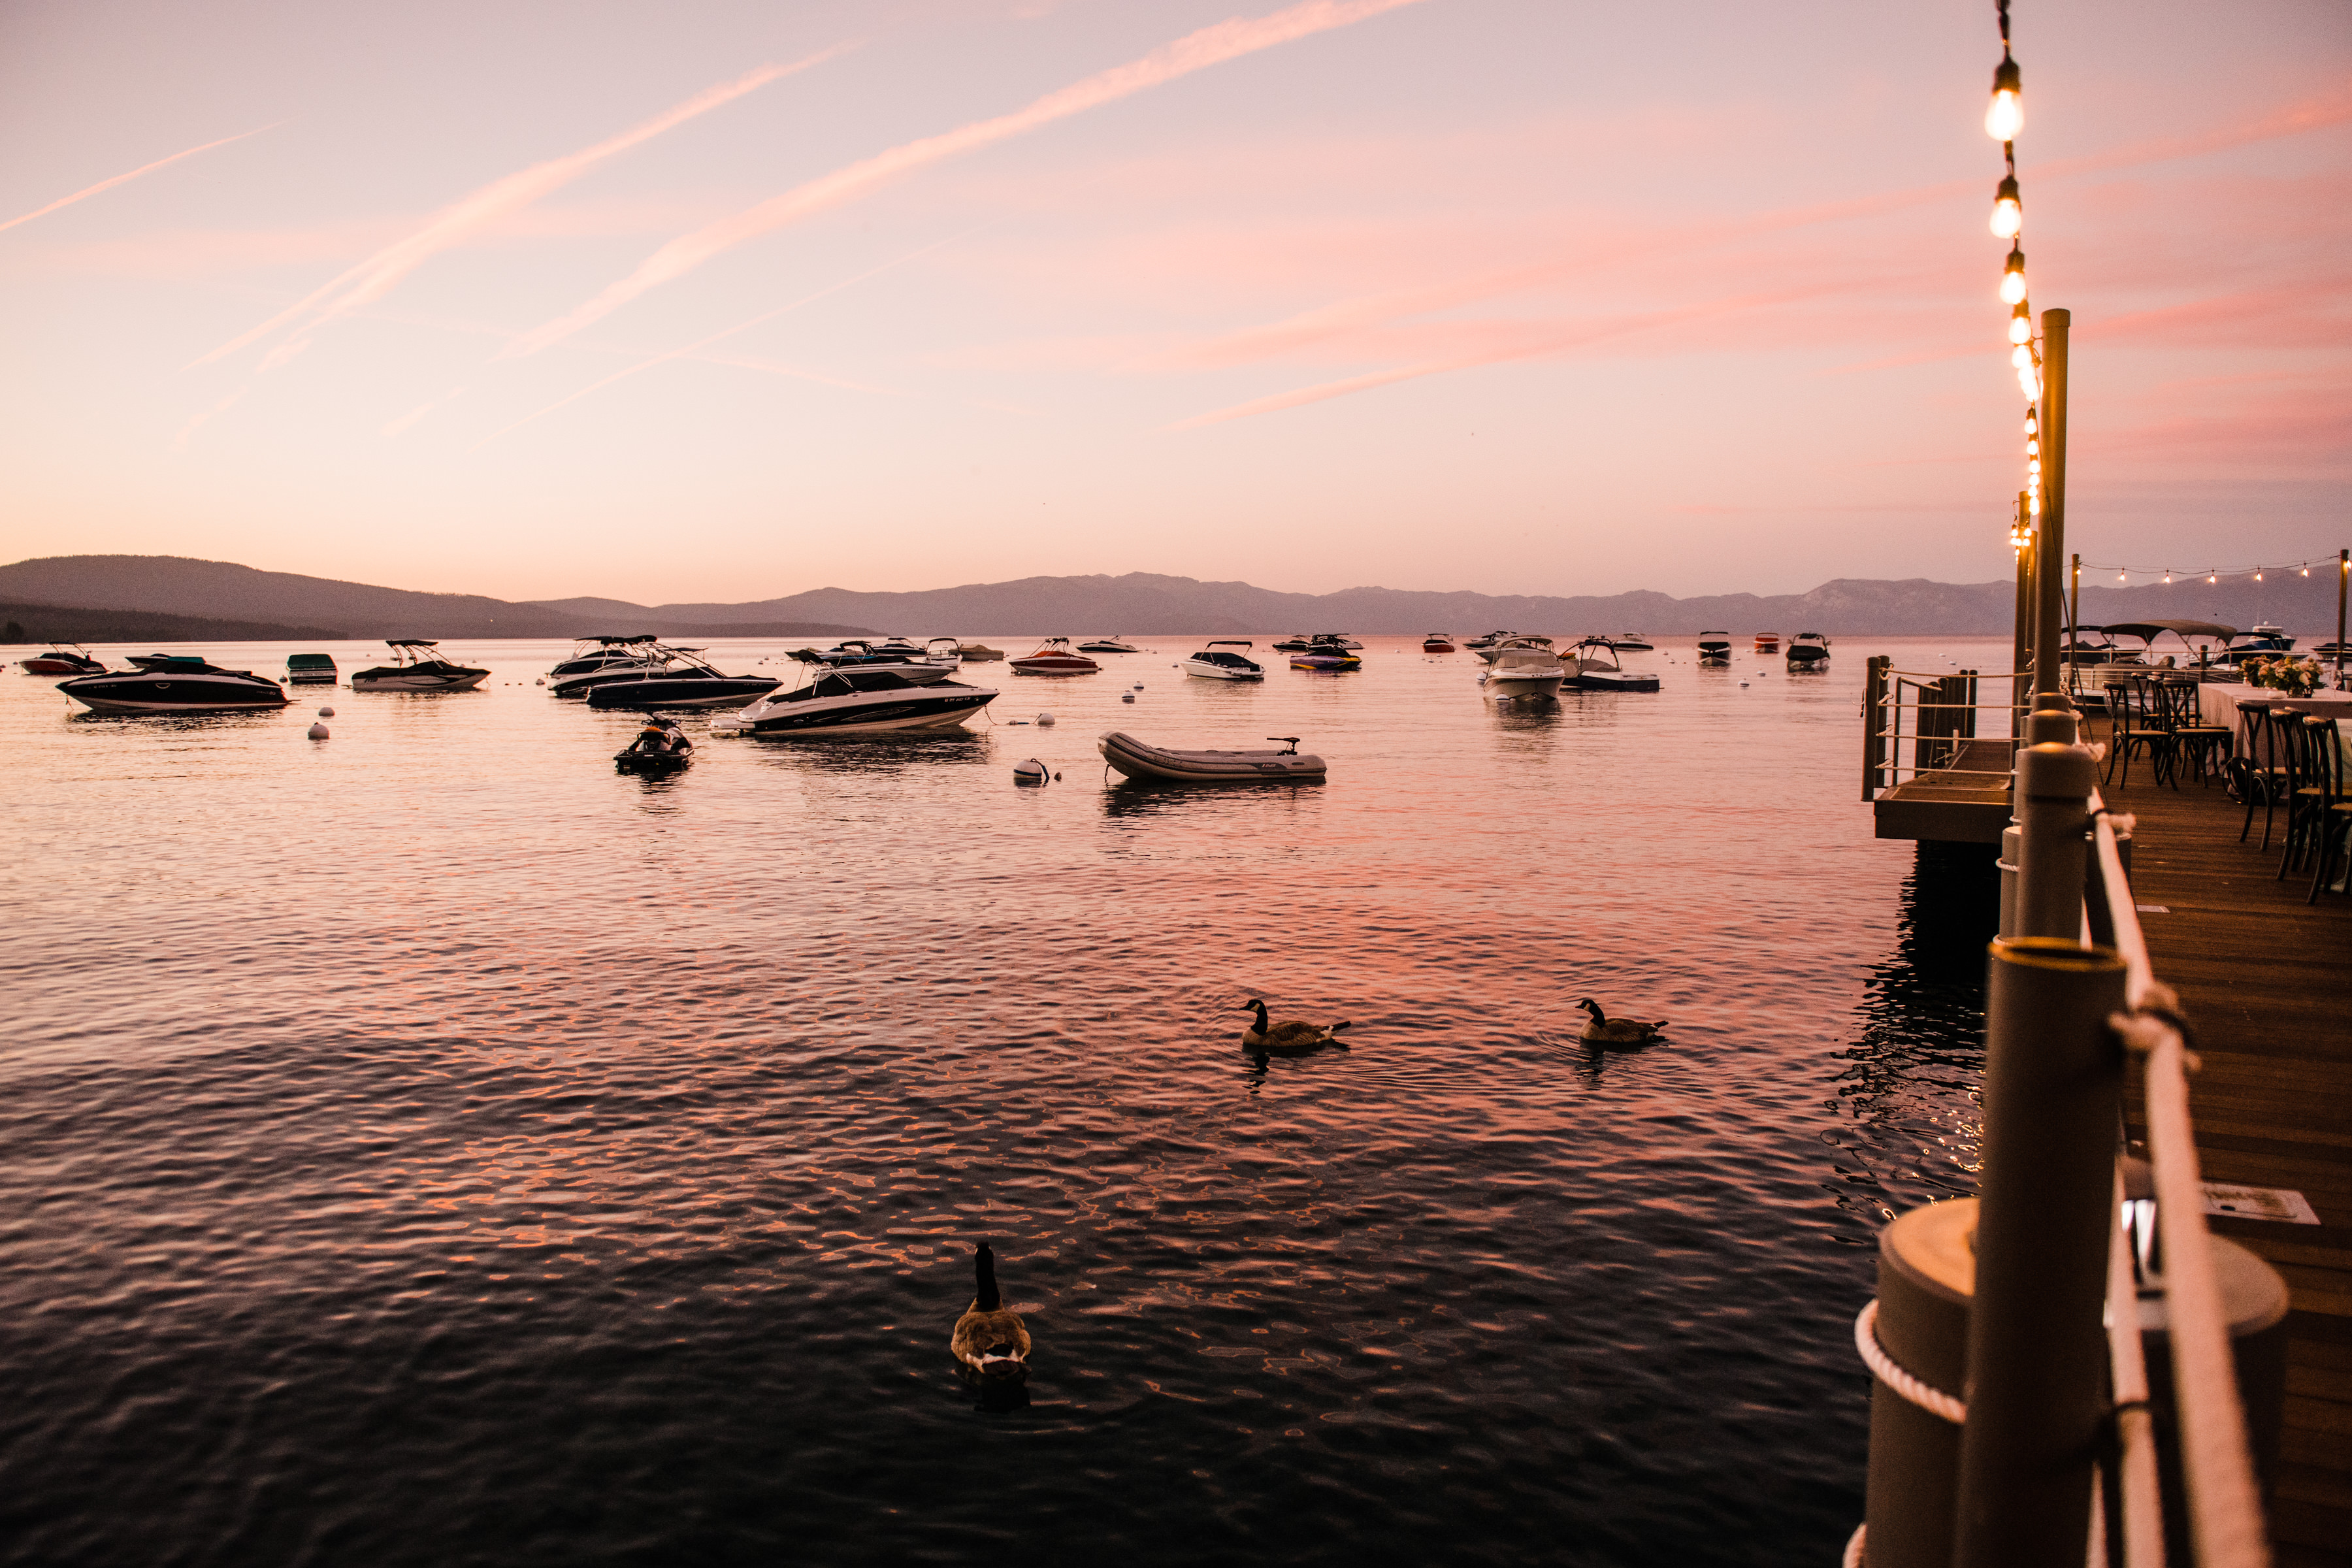 A sunset over Lake Tahoe seen from the West Shore Cafe Pier.